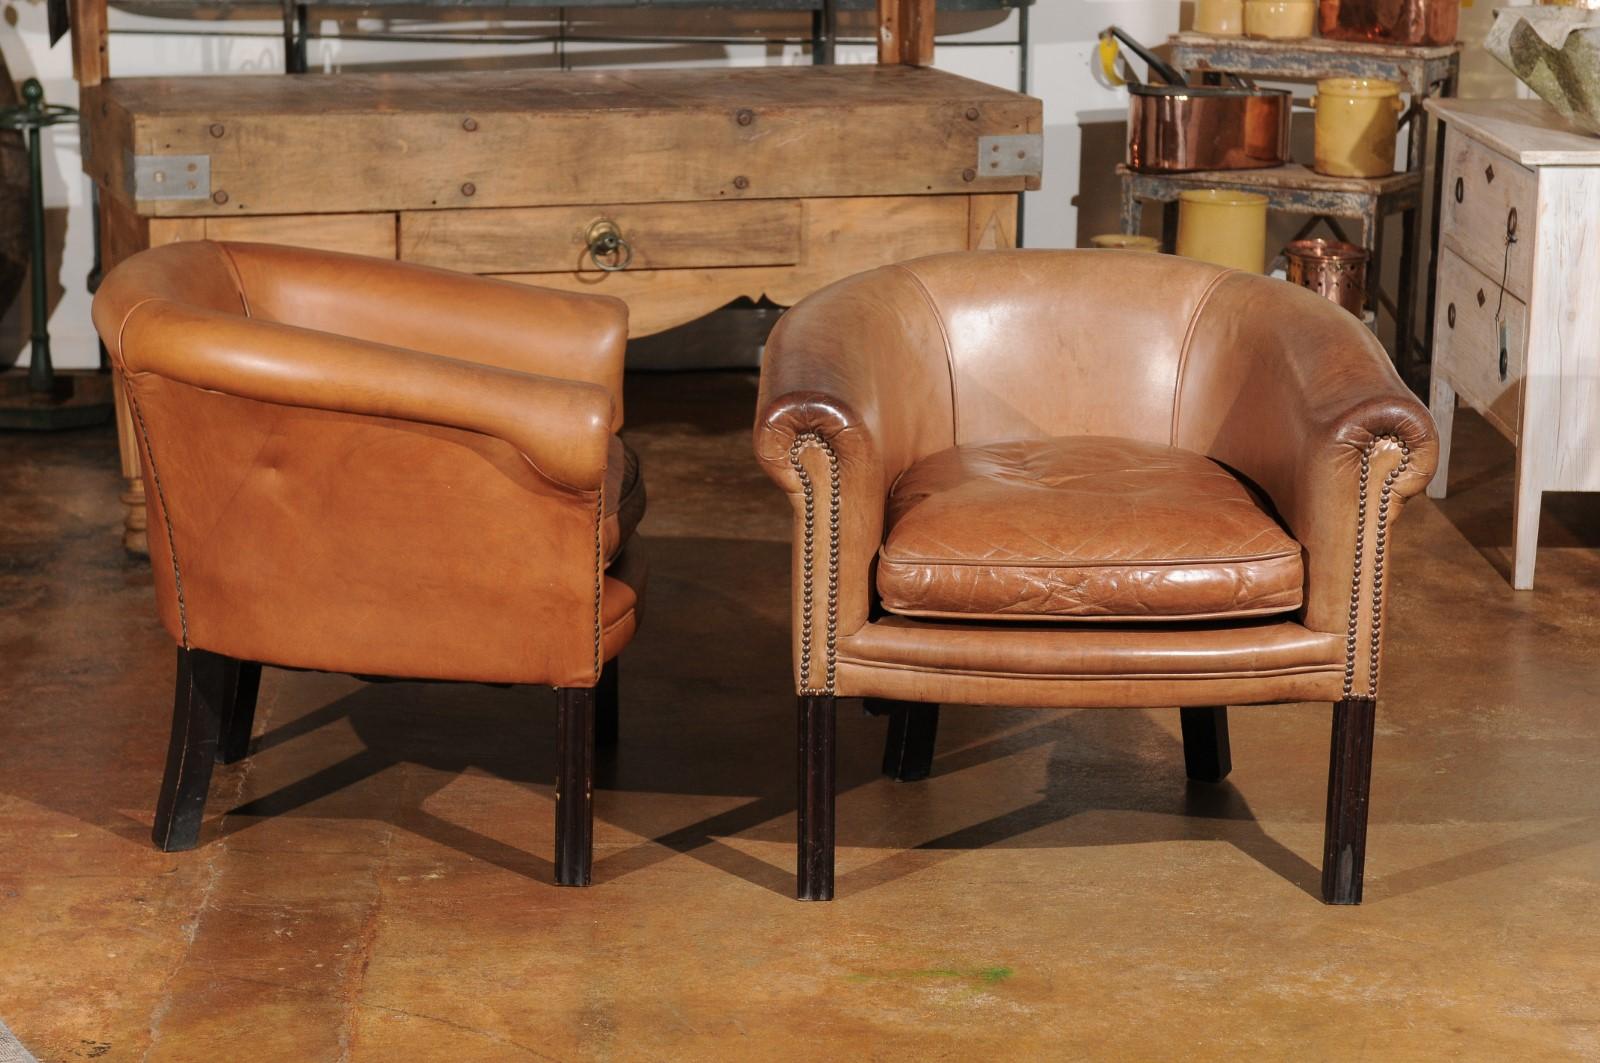 One pair of Italian vintage caramel leather club chairs from the mid-20th century, with cushion, dark brown legs and brass nail-head trim.  Born in Italy during the mid-century period, this pair of leather club chairs presents a horse back with